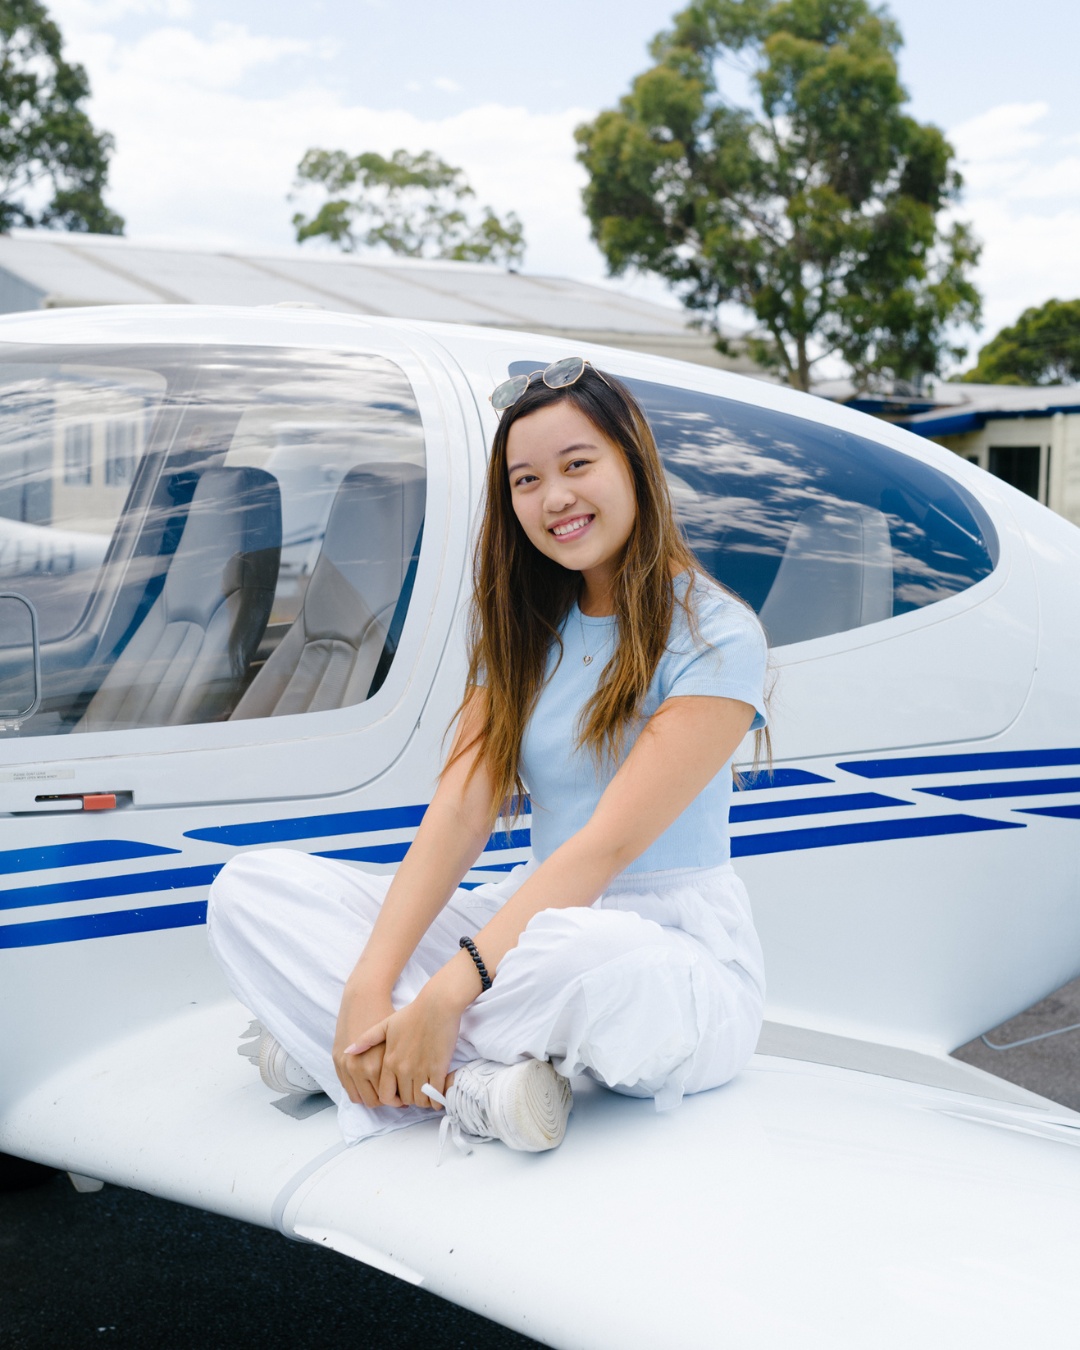 6 Things You Can Do With a Private Pilot’s Licence in Australia